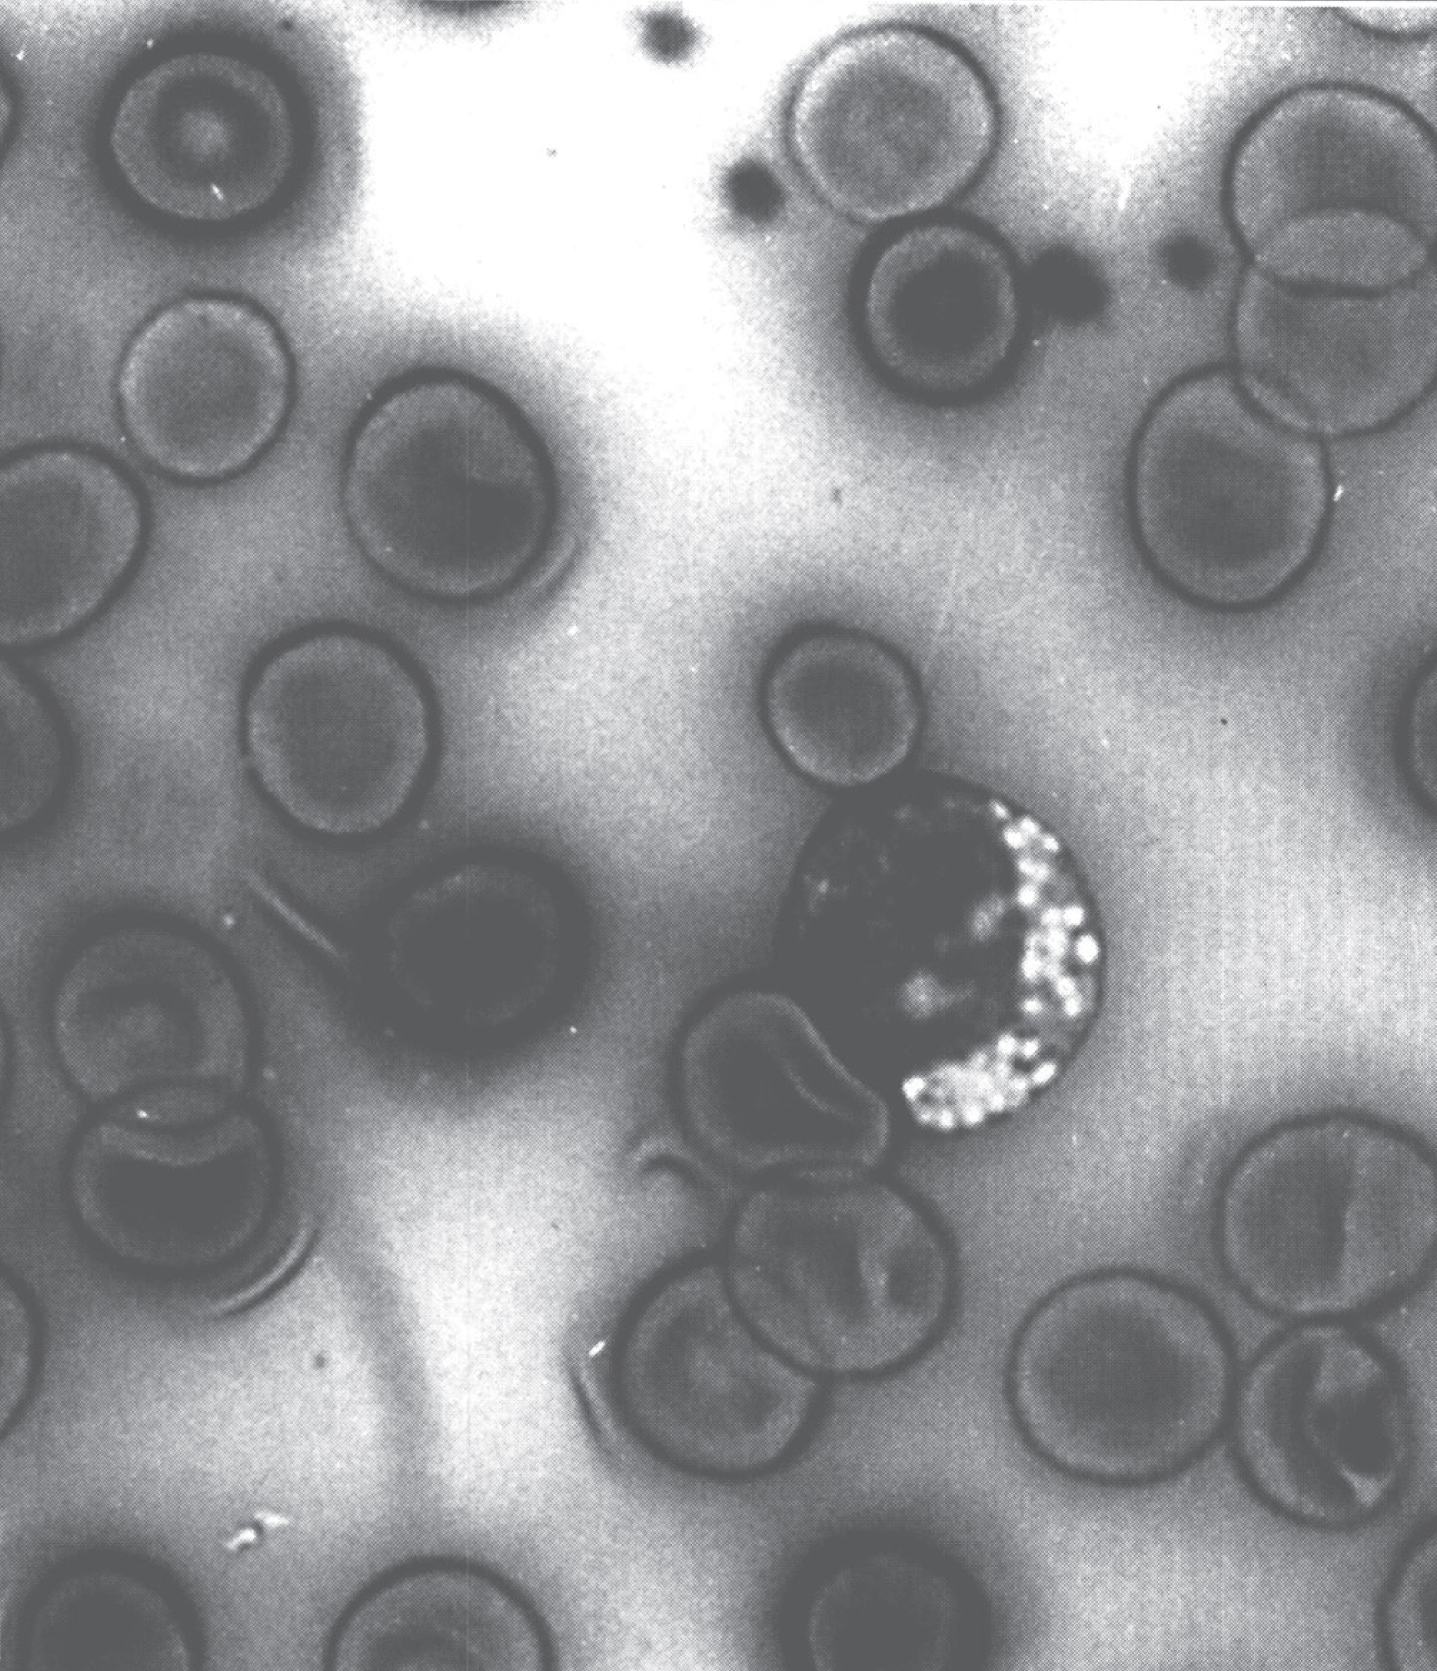 Vacuolated lymphocyte in the peripheral blood of a patient with mannosidosis.